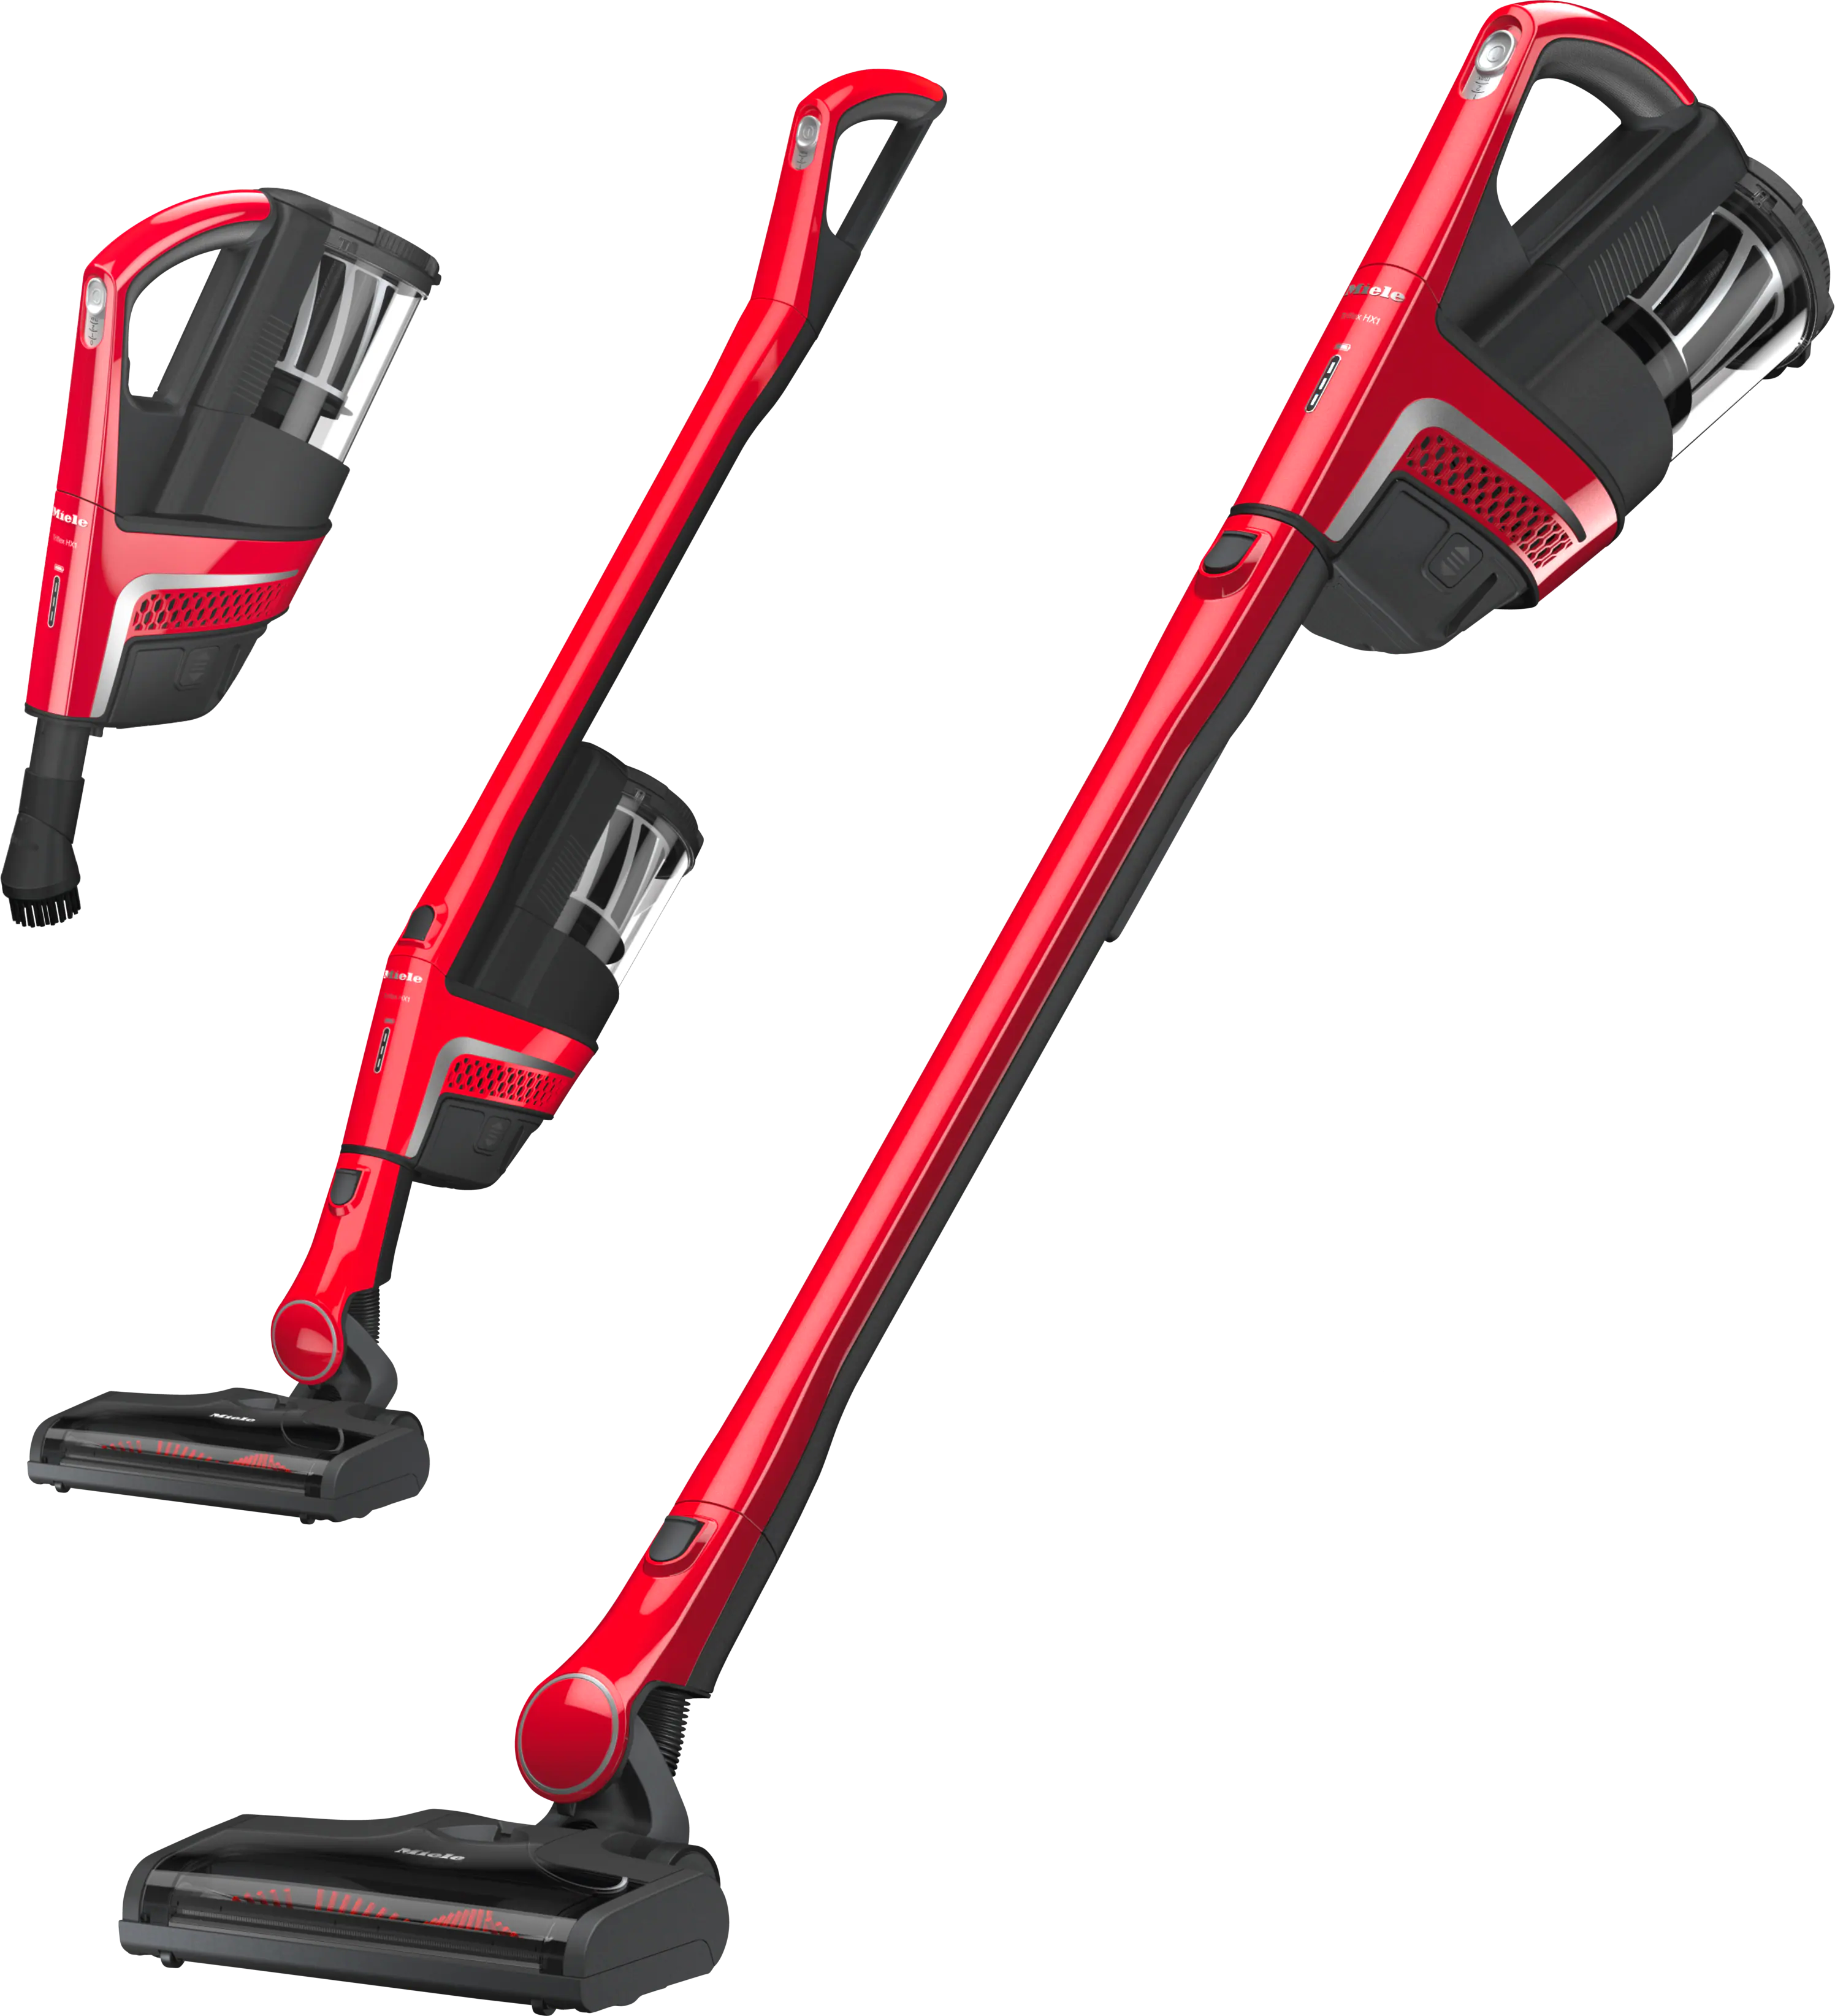 Miele Triflex HX1 - SMUL0 Ruby Red Velvet Cordless Stick Vacuum Cleaner